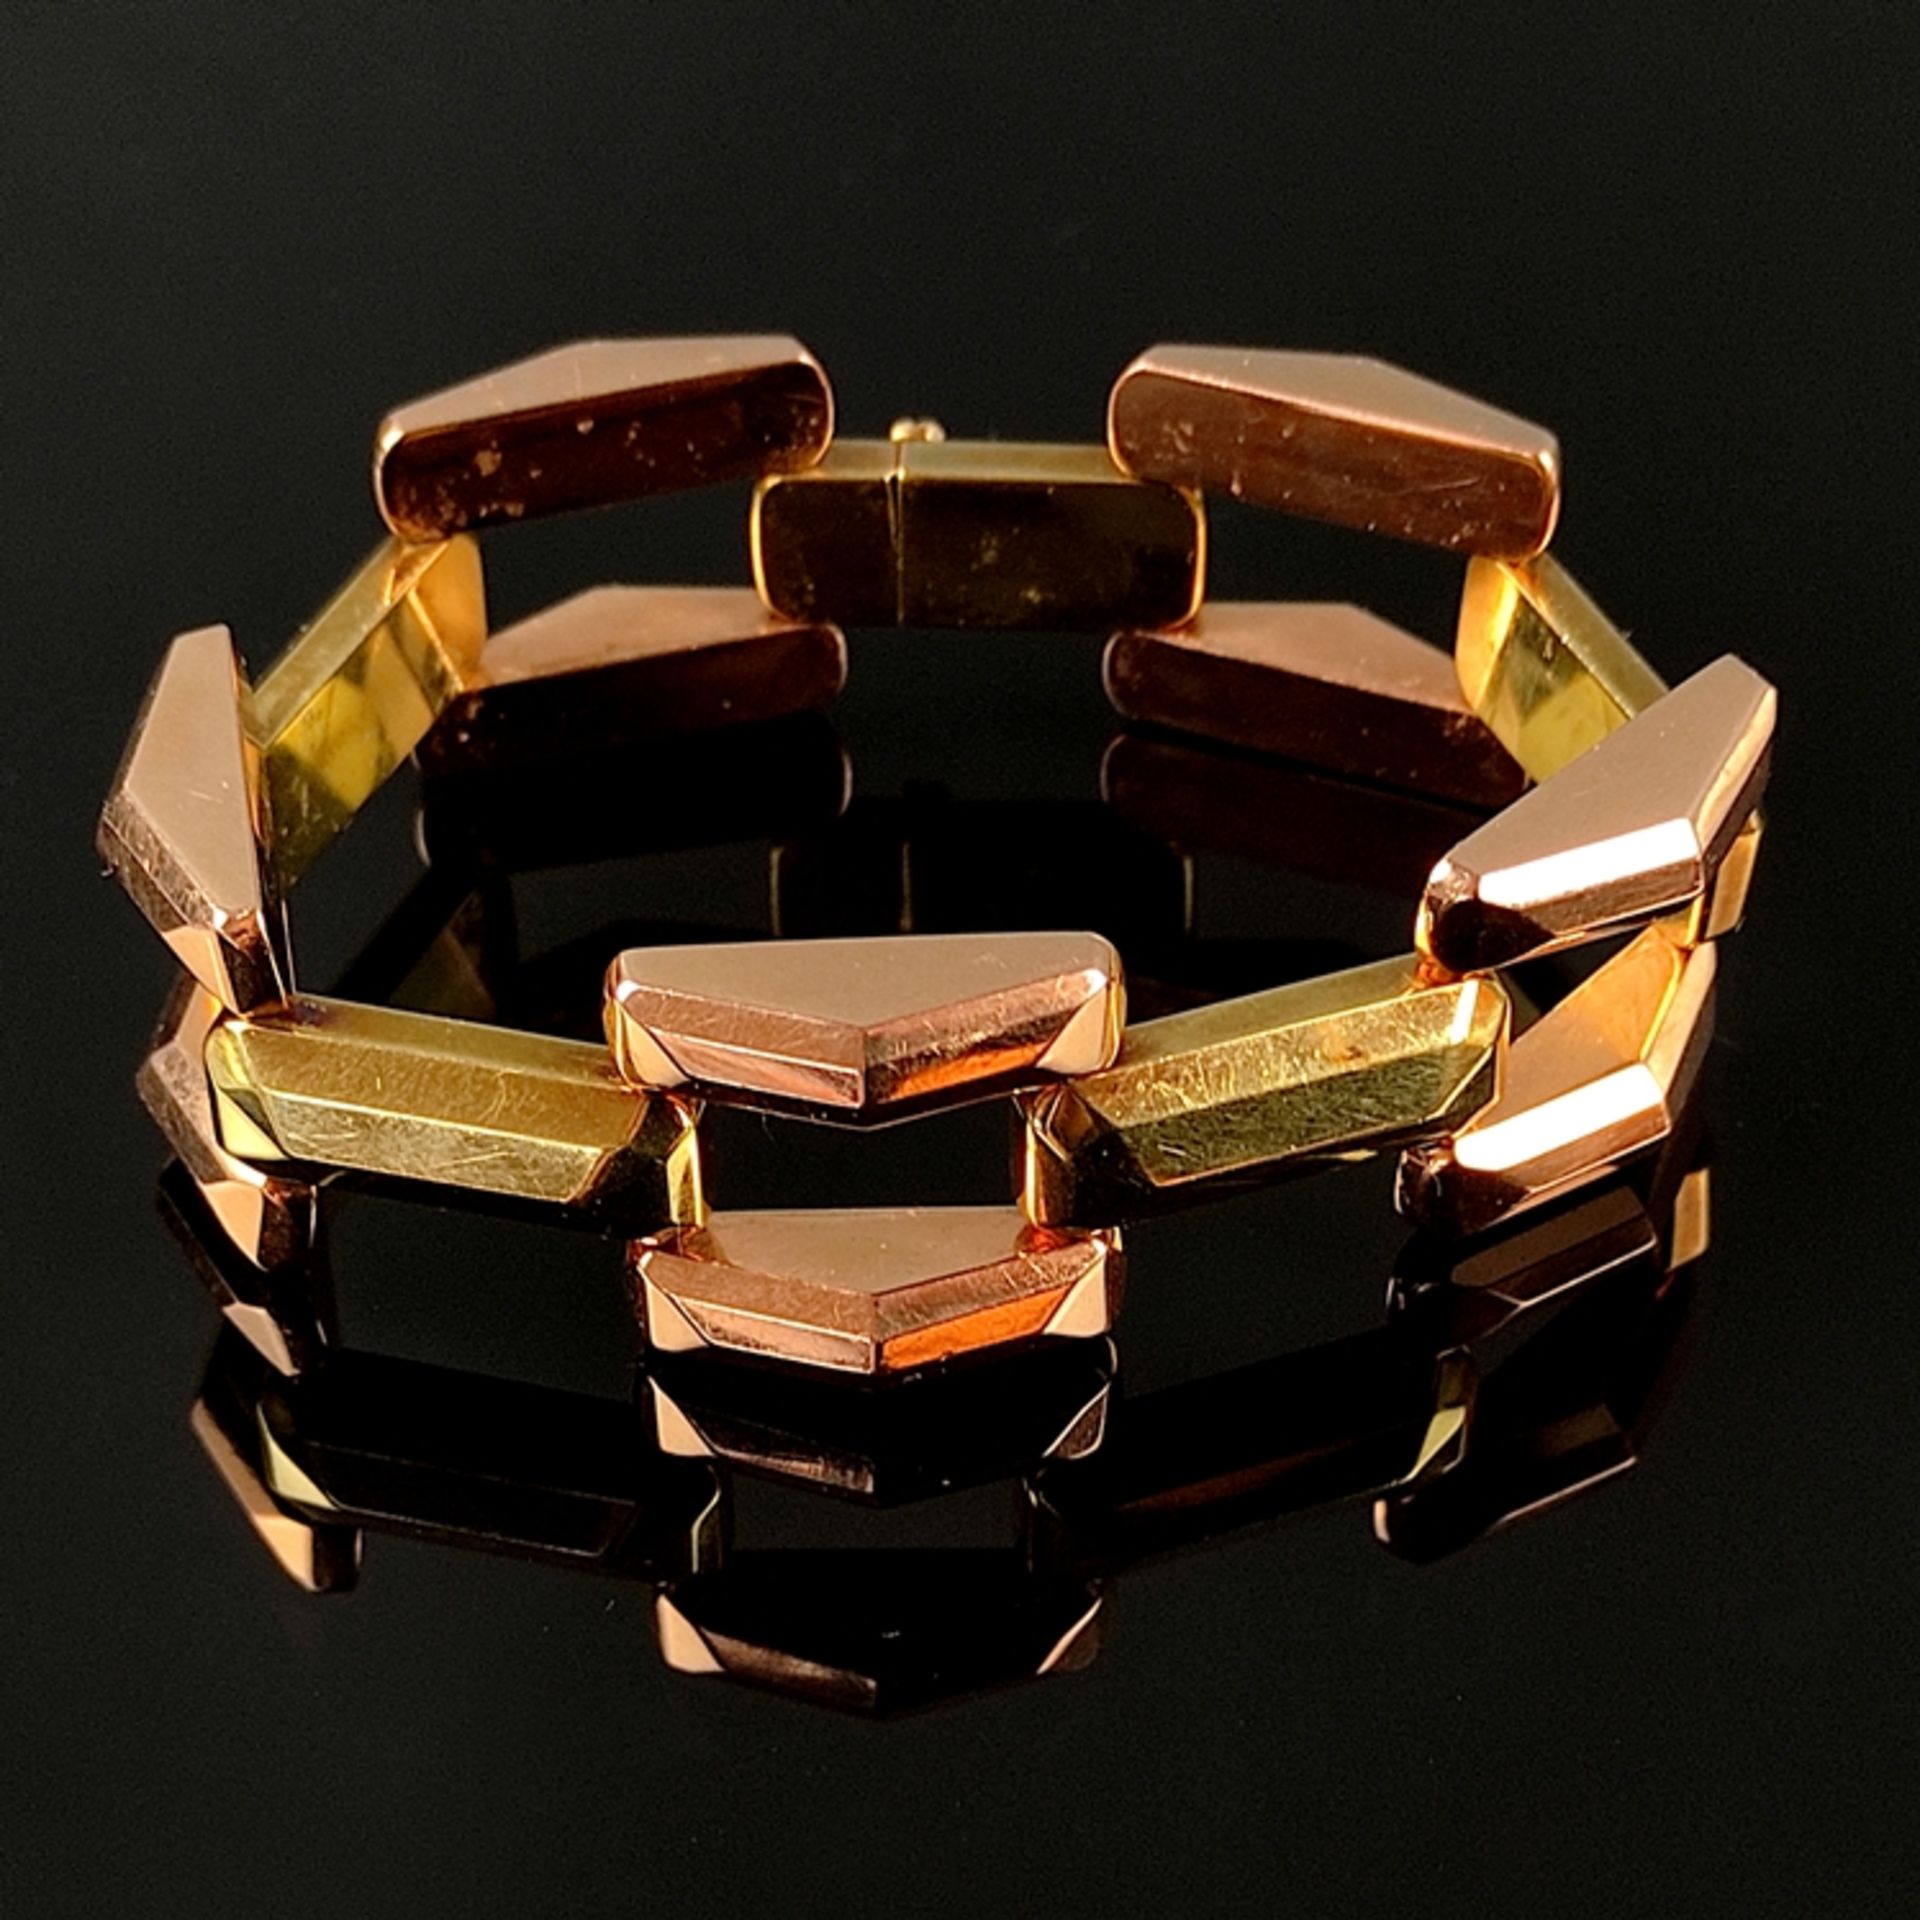 Extravagant vintage bracelet, 585/14K rose/yellow gold, 35.48g, made of links in geometric shapes, 